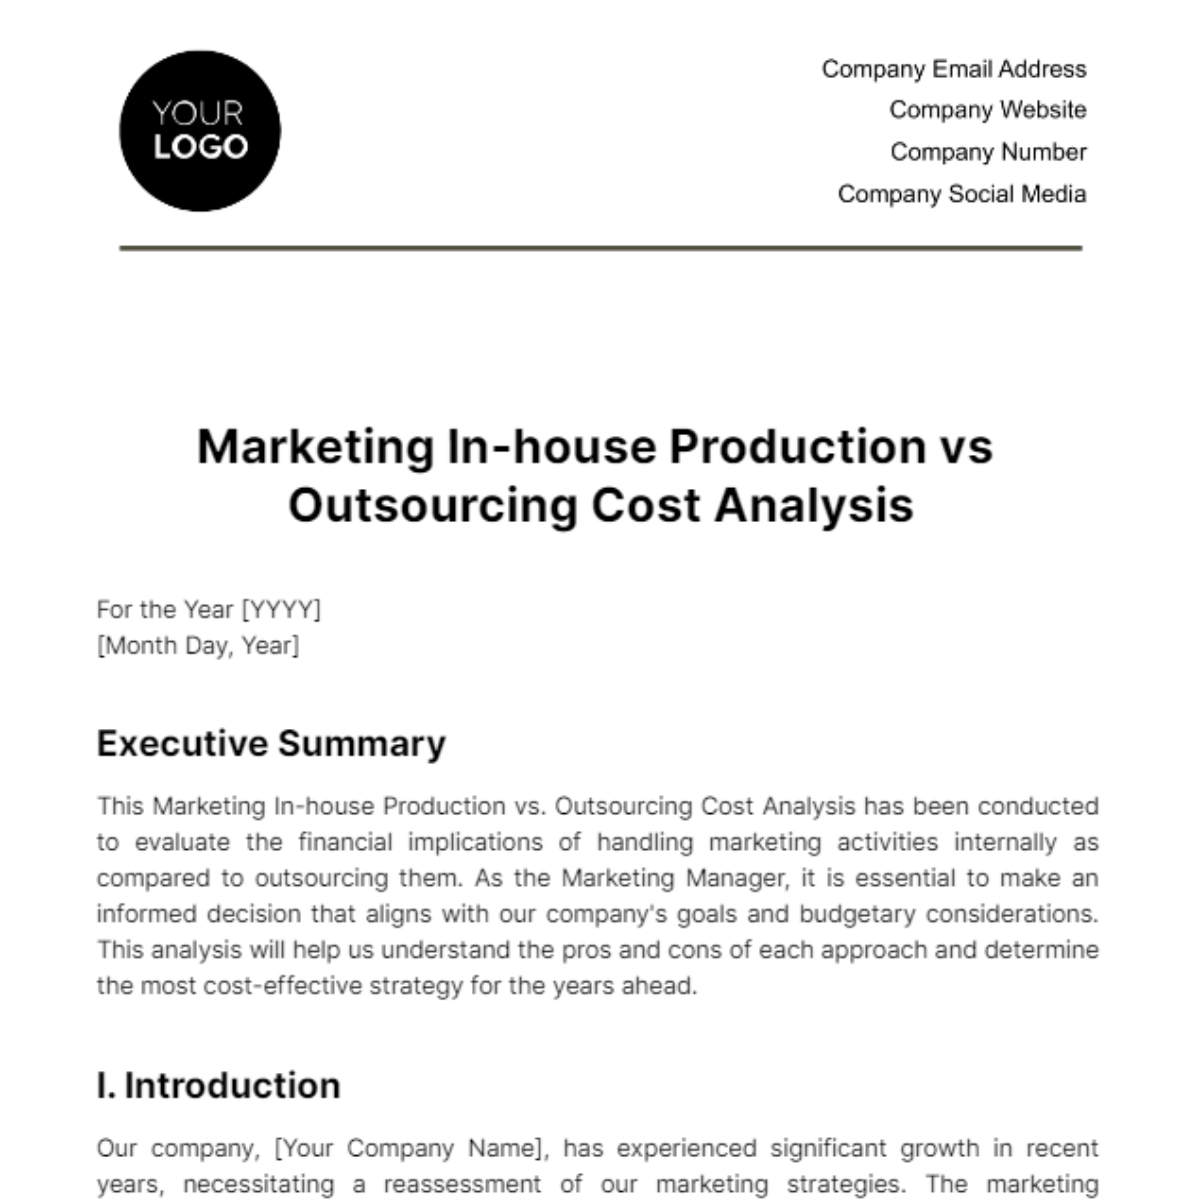 Marketing In-house Production vs Outsourcing Cost Analysis Template